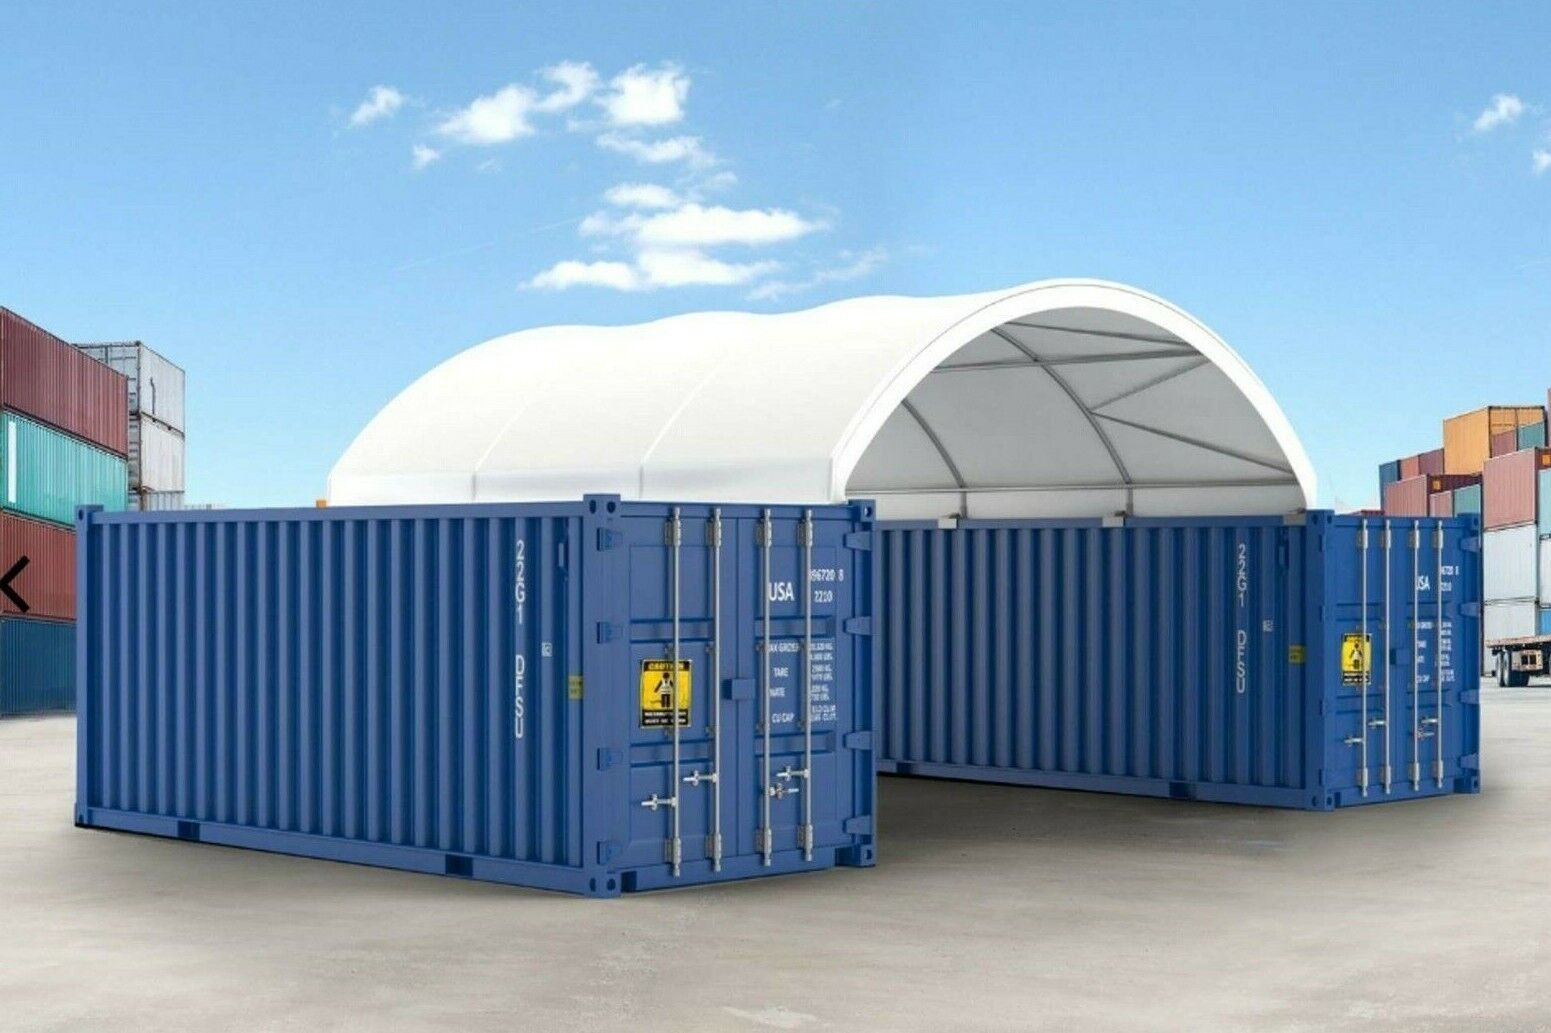 Covermore 20'x20' 15 oz. PVC Conex Container Shipping Fa Discount is also underway Now free shipping Cargo